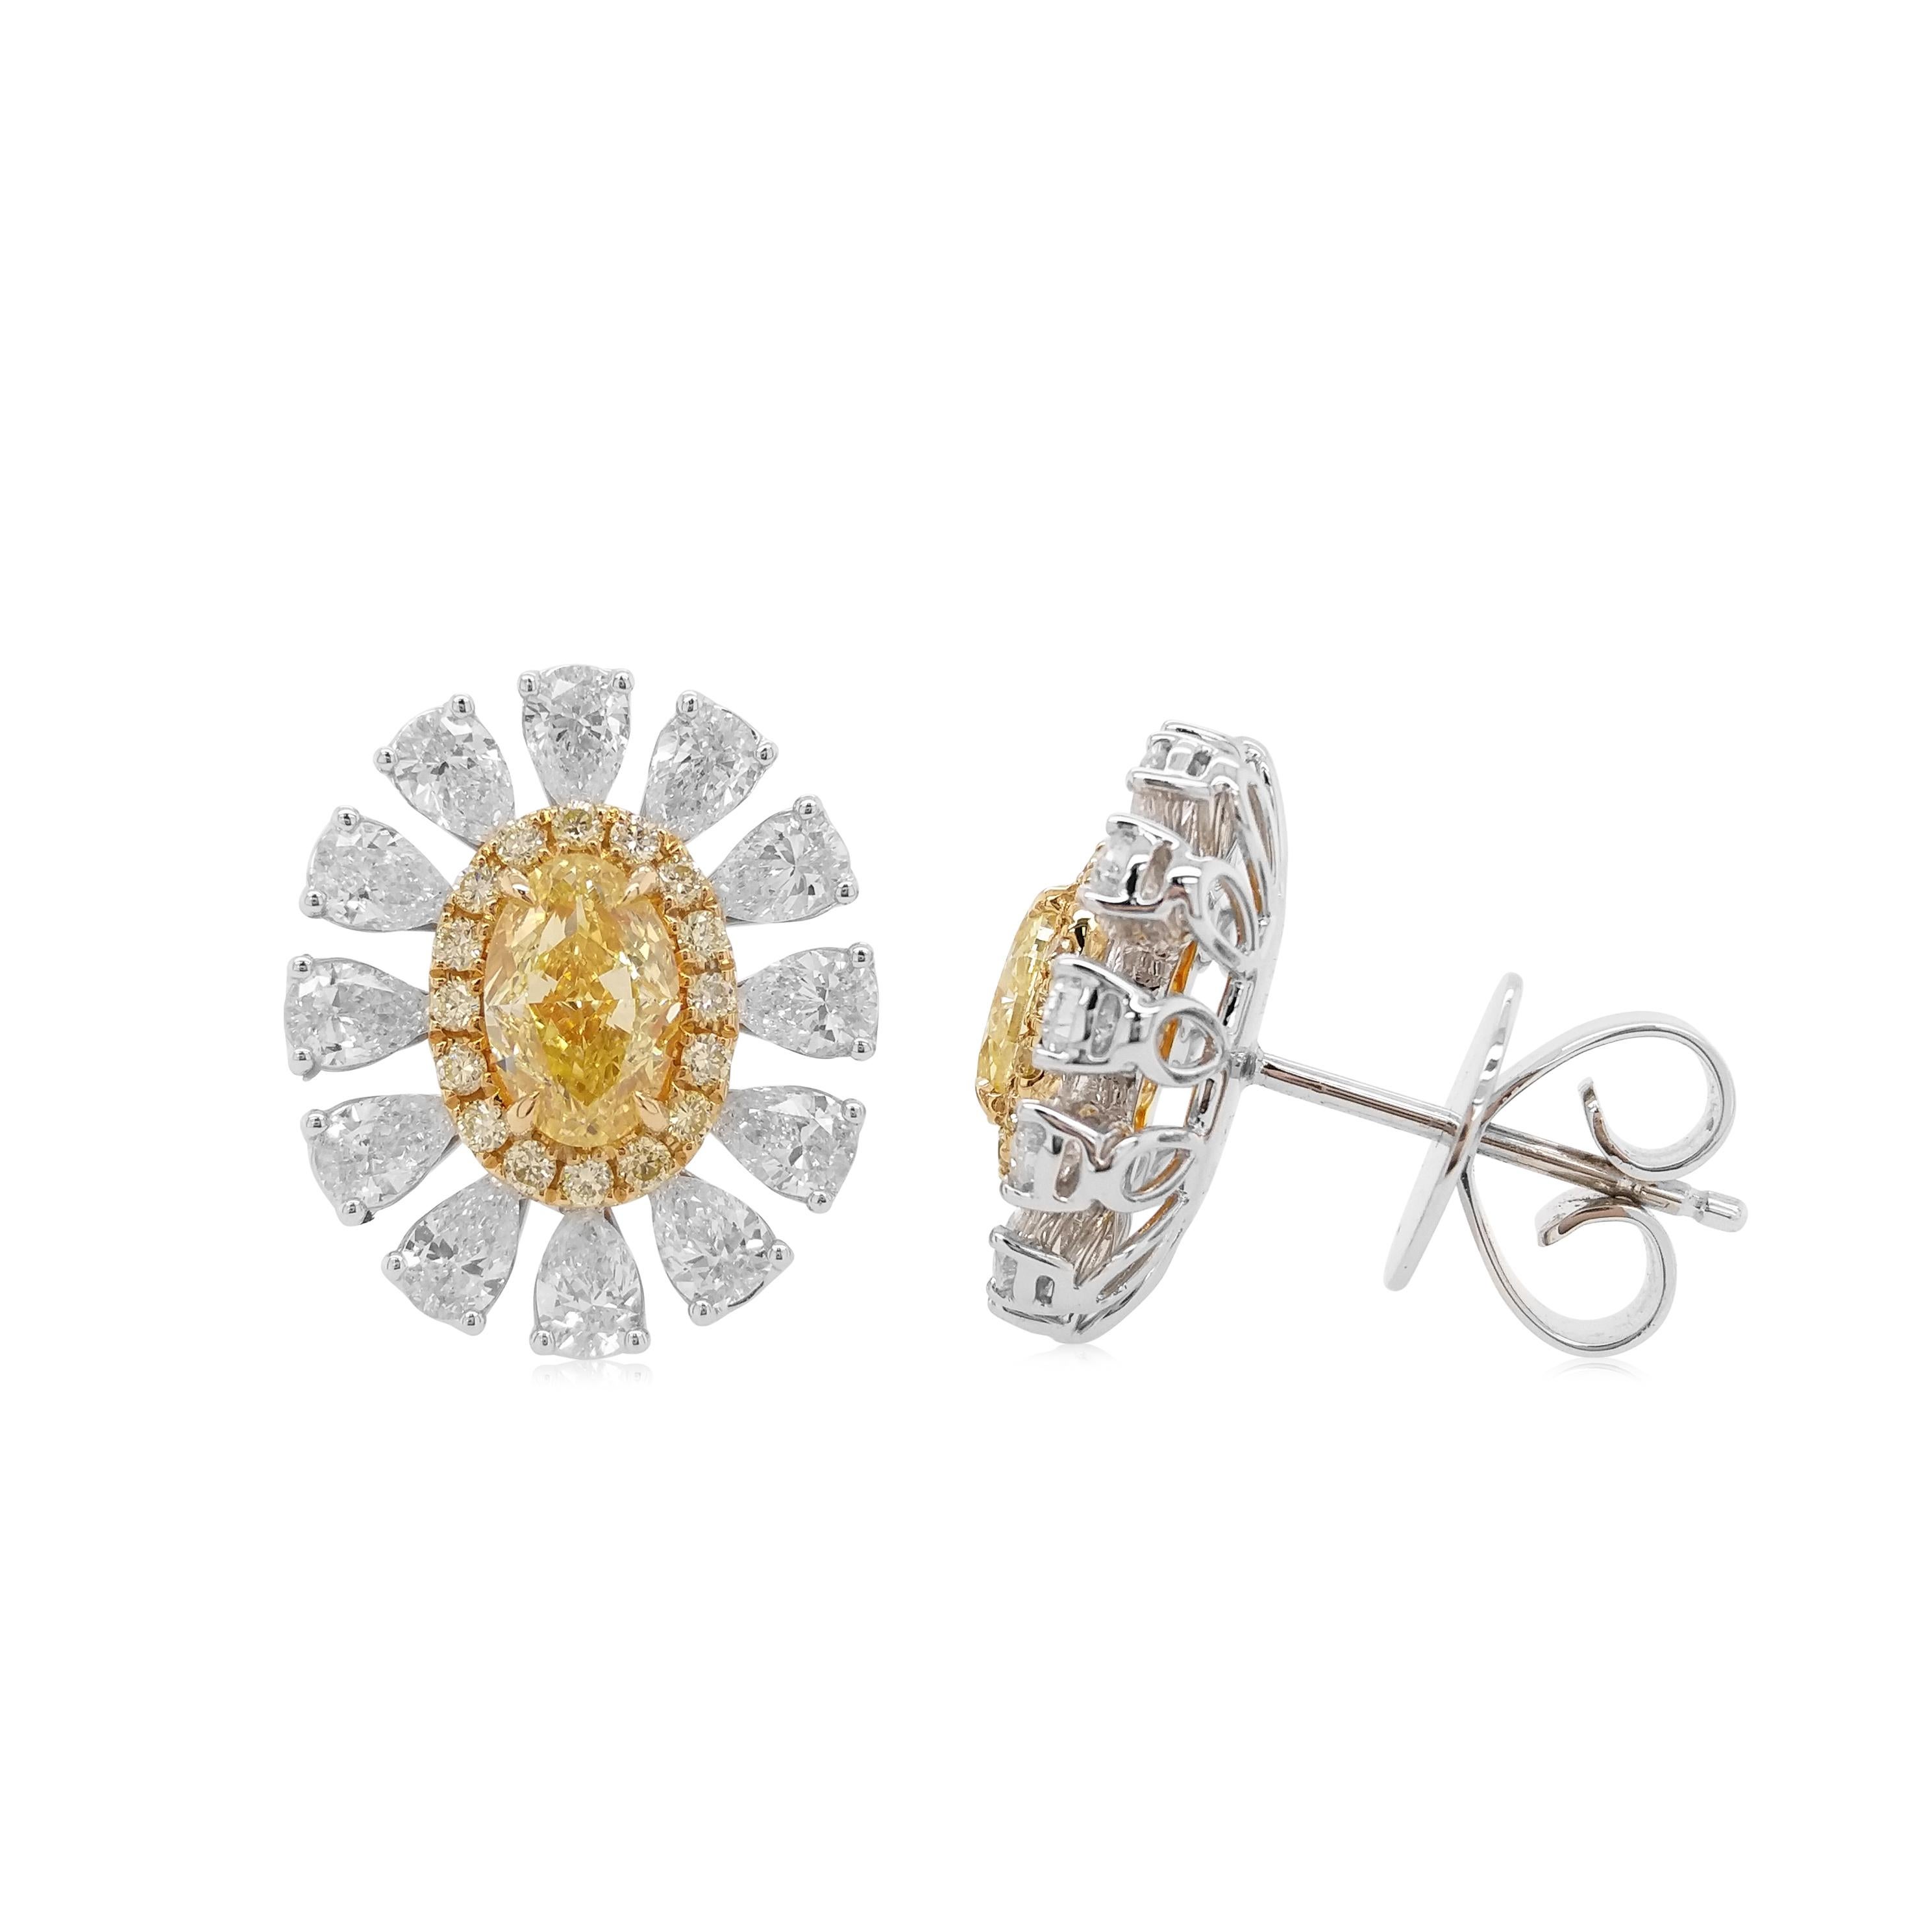 These unique flower-shaped earrings feature stunning oval-shaped Yellow diamonds at the heart of their design. The rich colour of these diamonds is complimented perfectly by the delicate 18 Karat white gold floral design which is completed by a